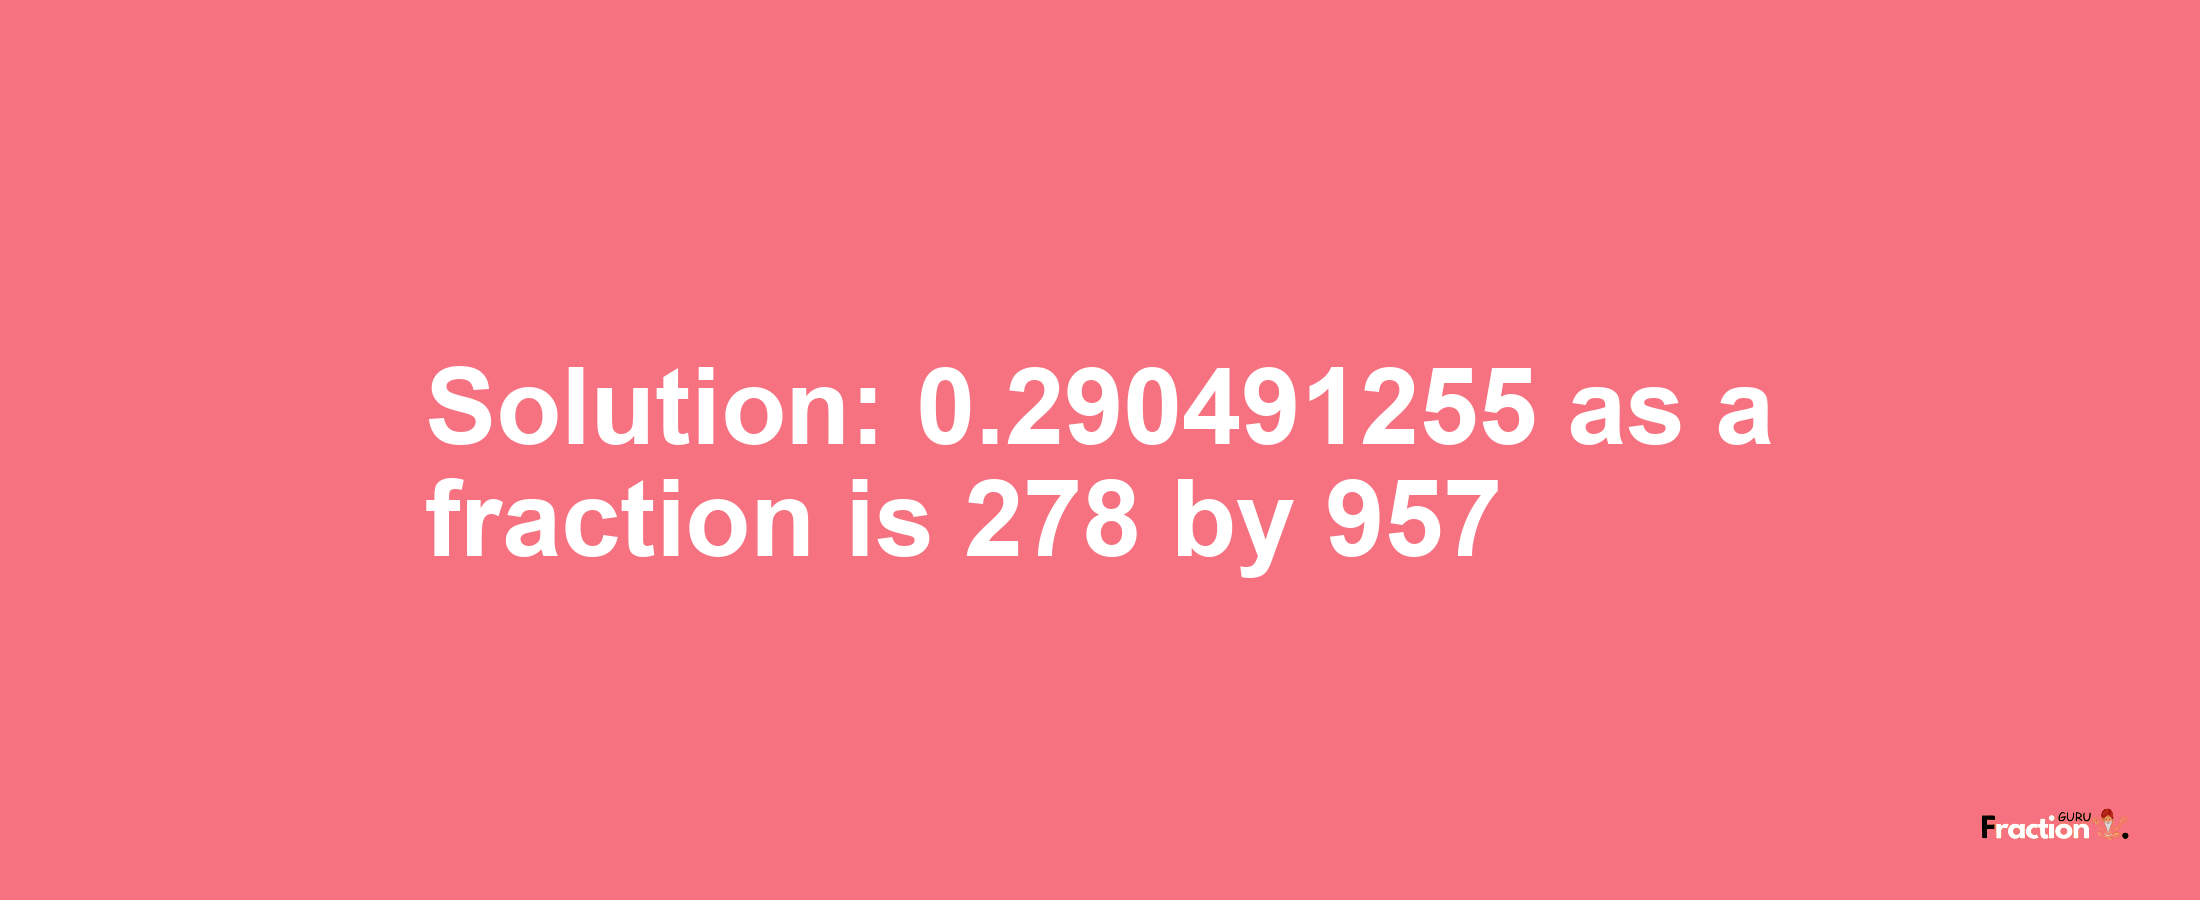 Solution:0.290491255 as a fraction is 278/957